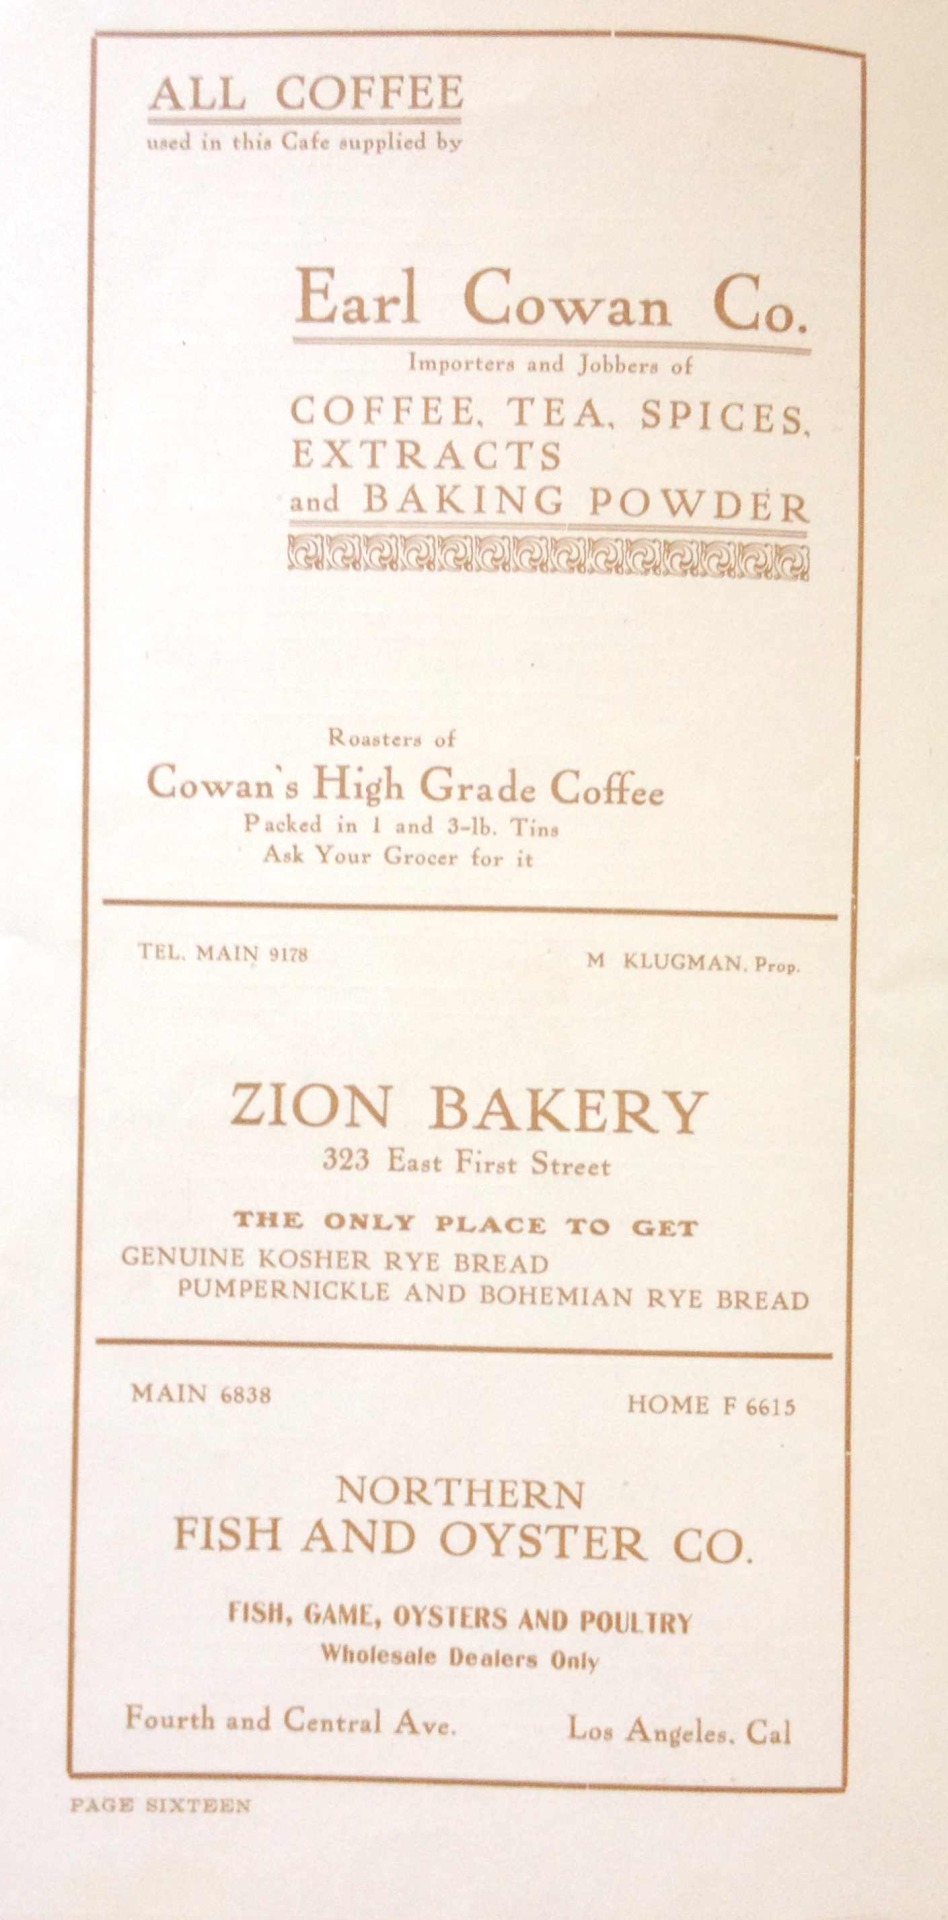 An immaculately designed, 28-page menu from Jahnke’s Restaurant and Cafe (mid 1920s is my best guess) also included advertisements for local food and drink suppliers alongside its thirty different relishes for twenty-two different oyster...